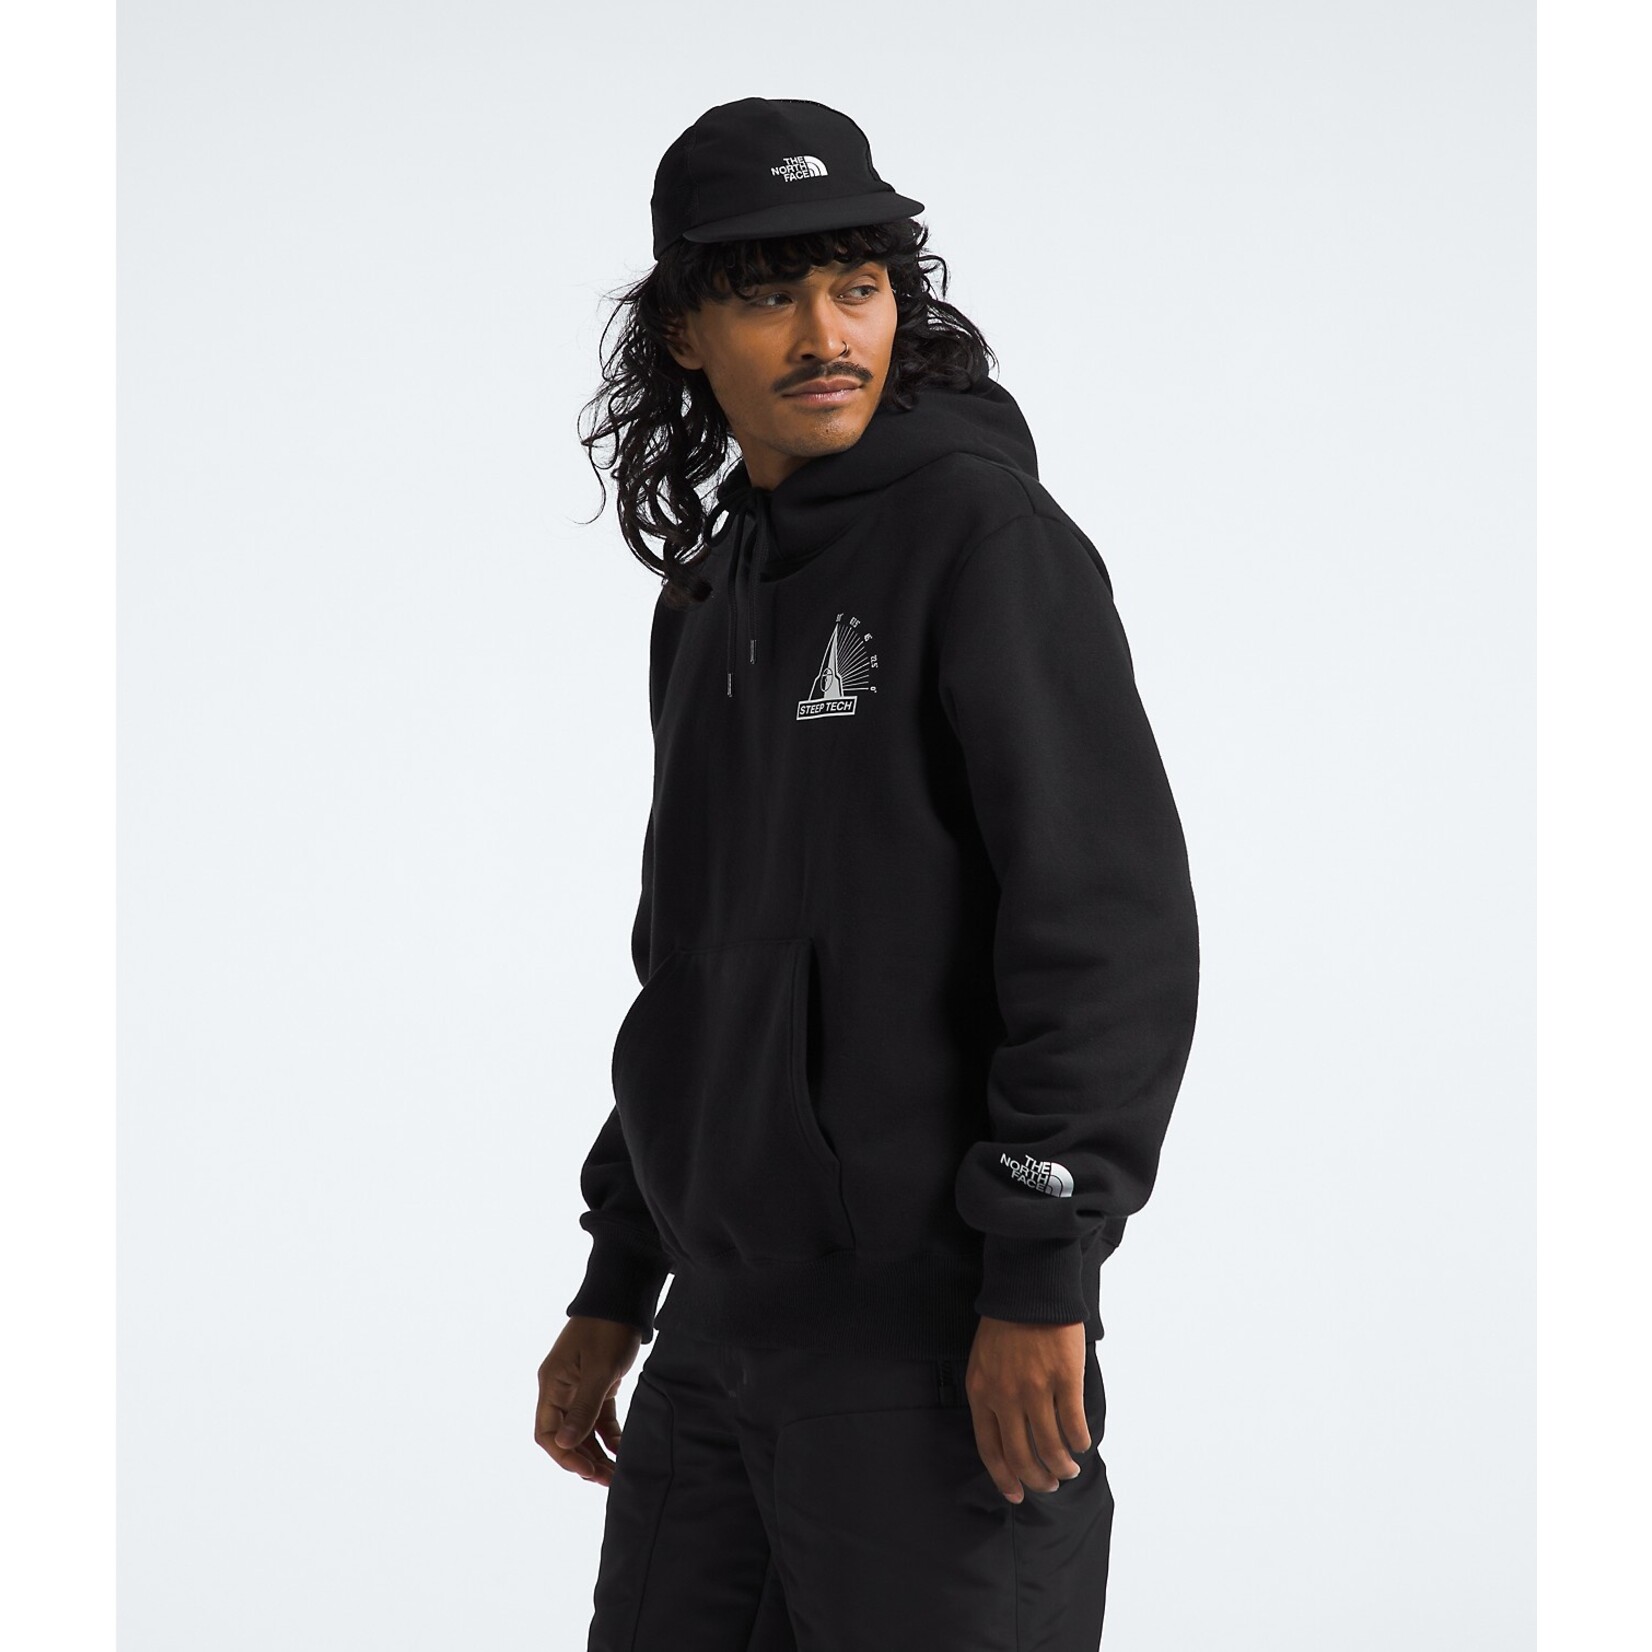 THE NORTH FACE Men’s Heavyweight Steep Tech Hoodie